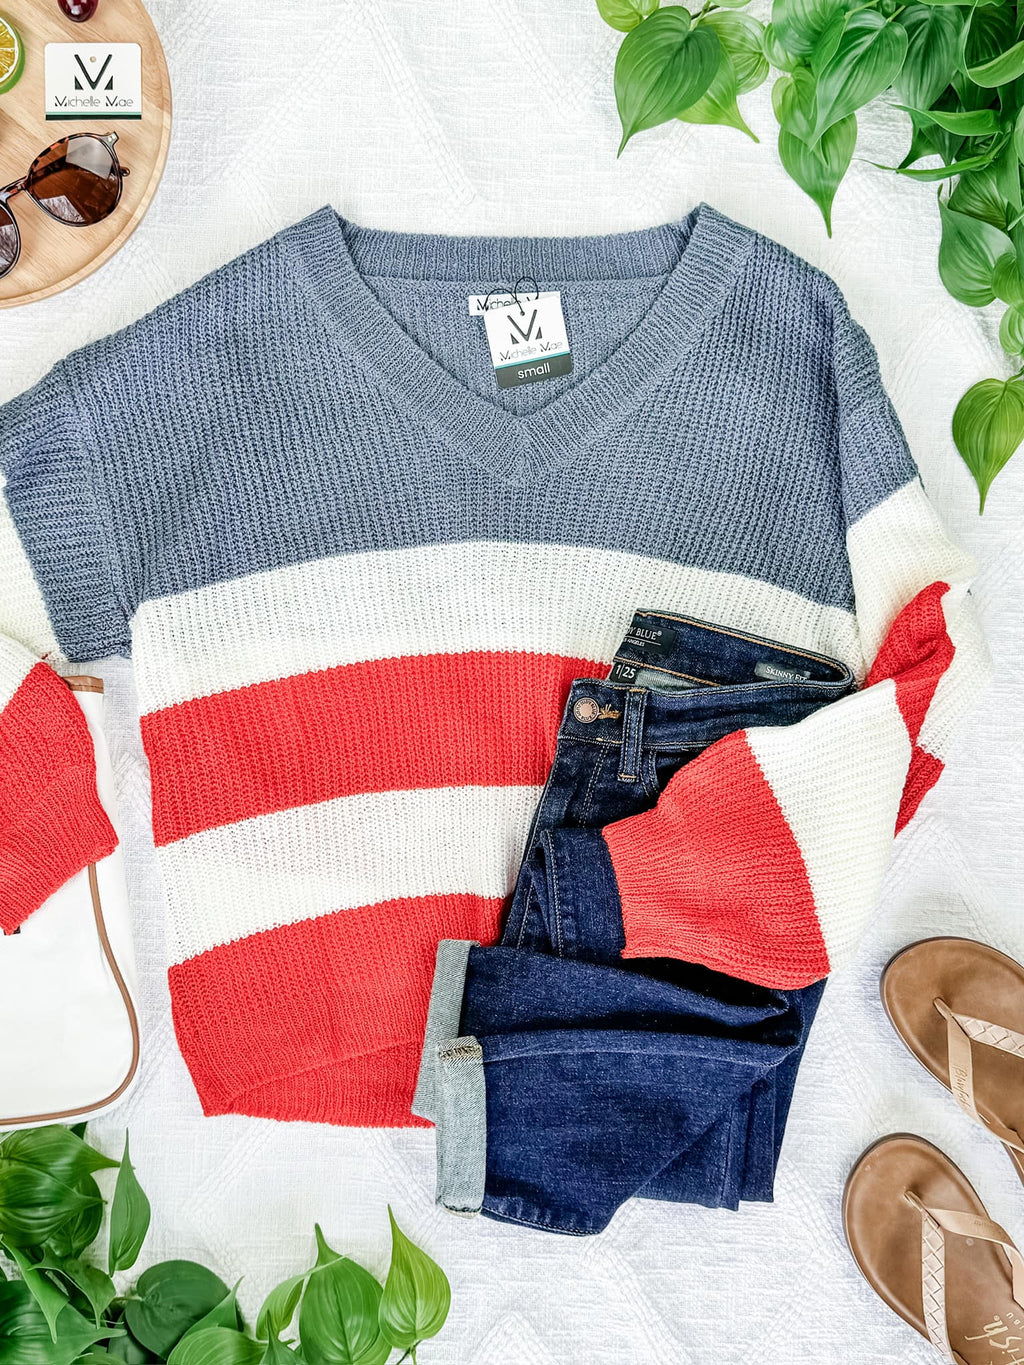 USA Colorblock Stripes Sweater by Michelle Mae